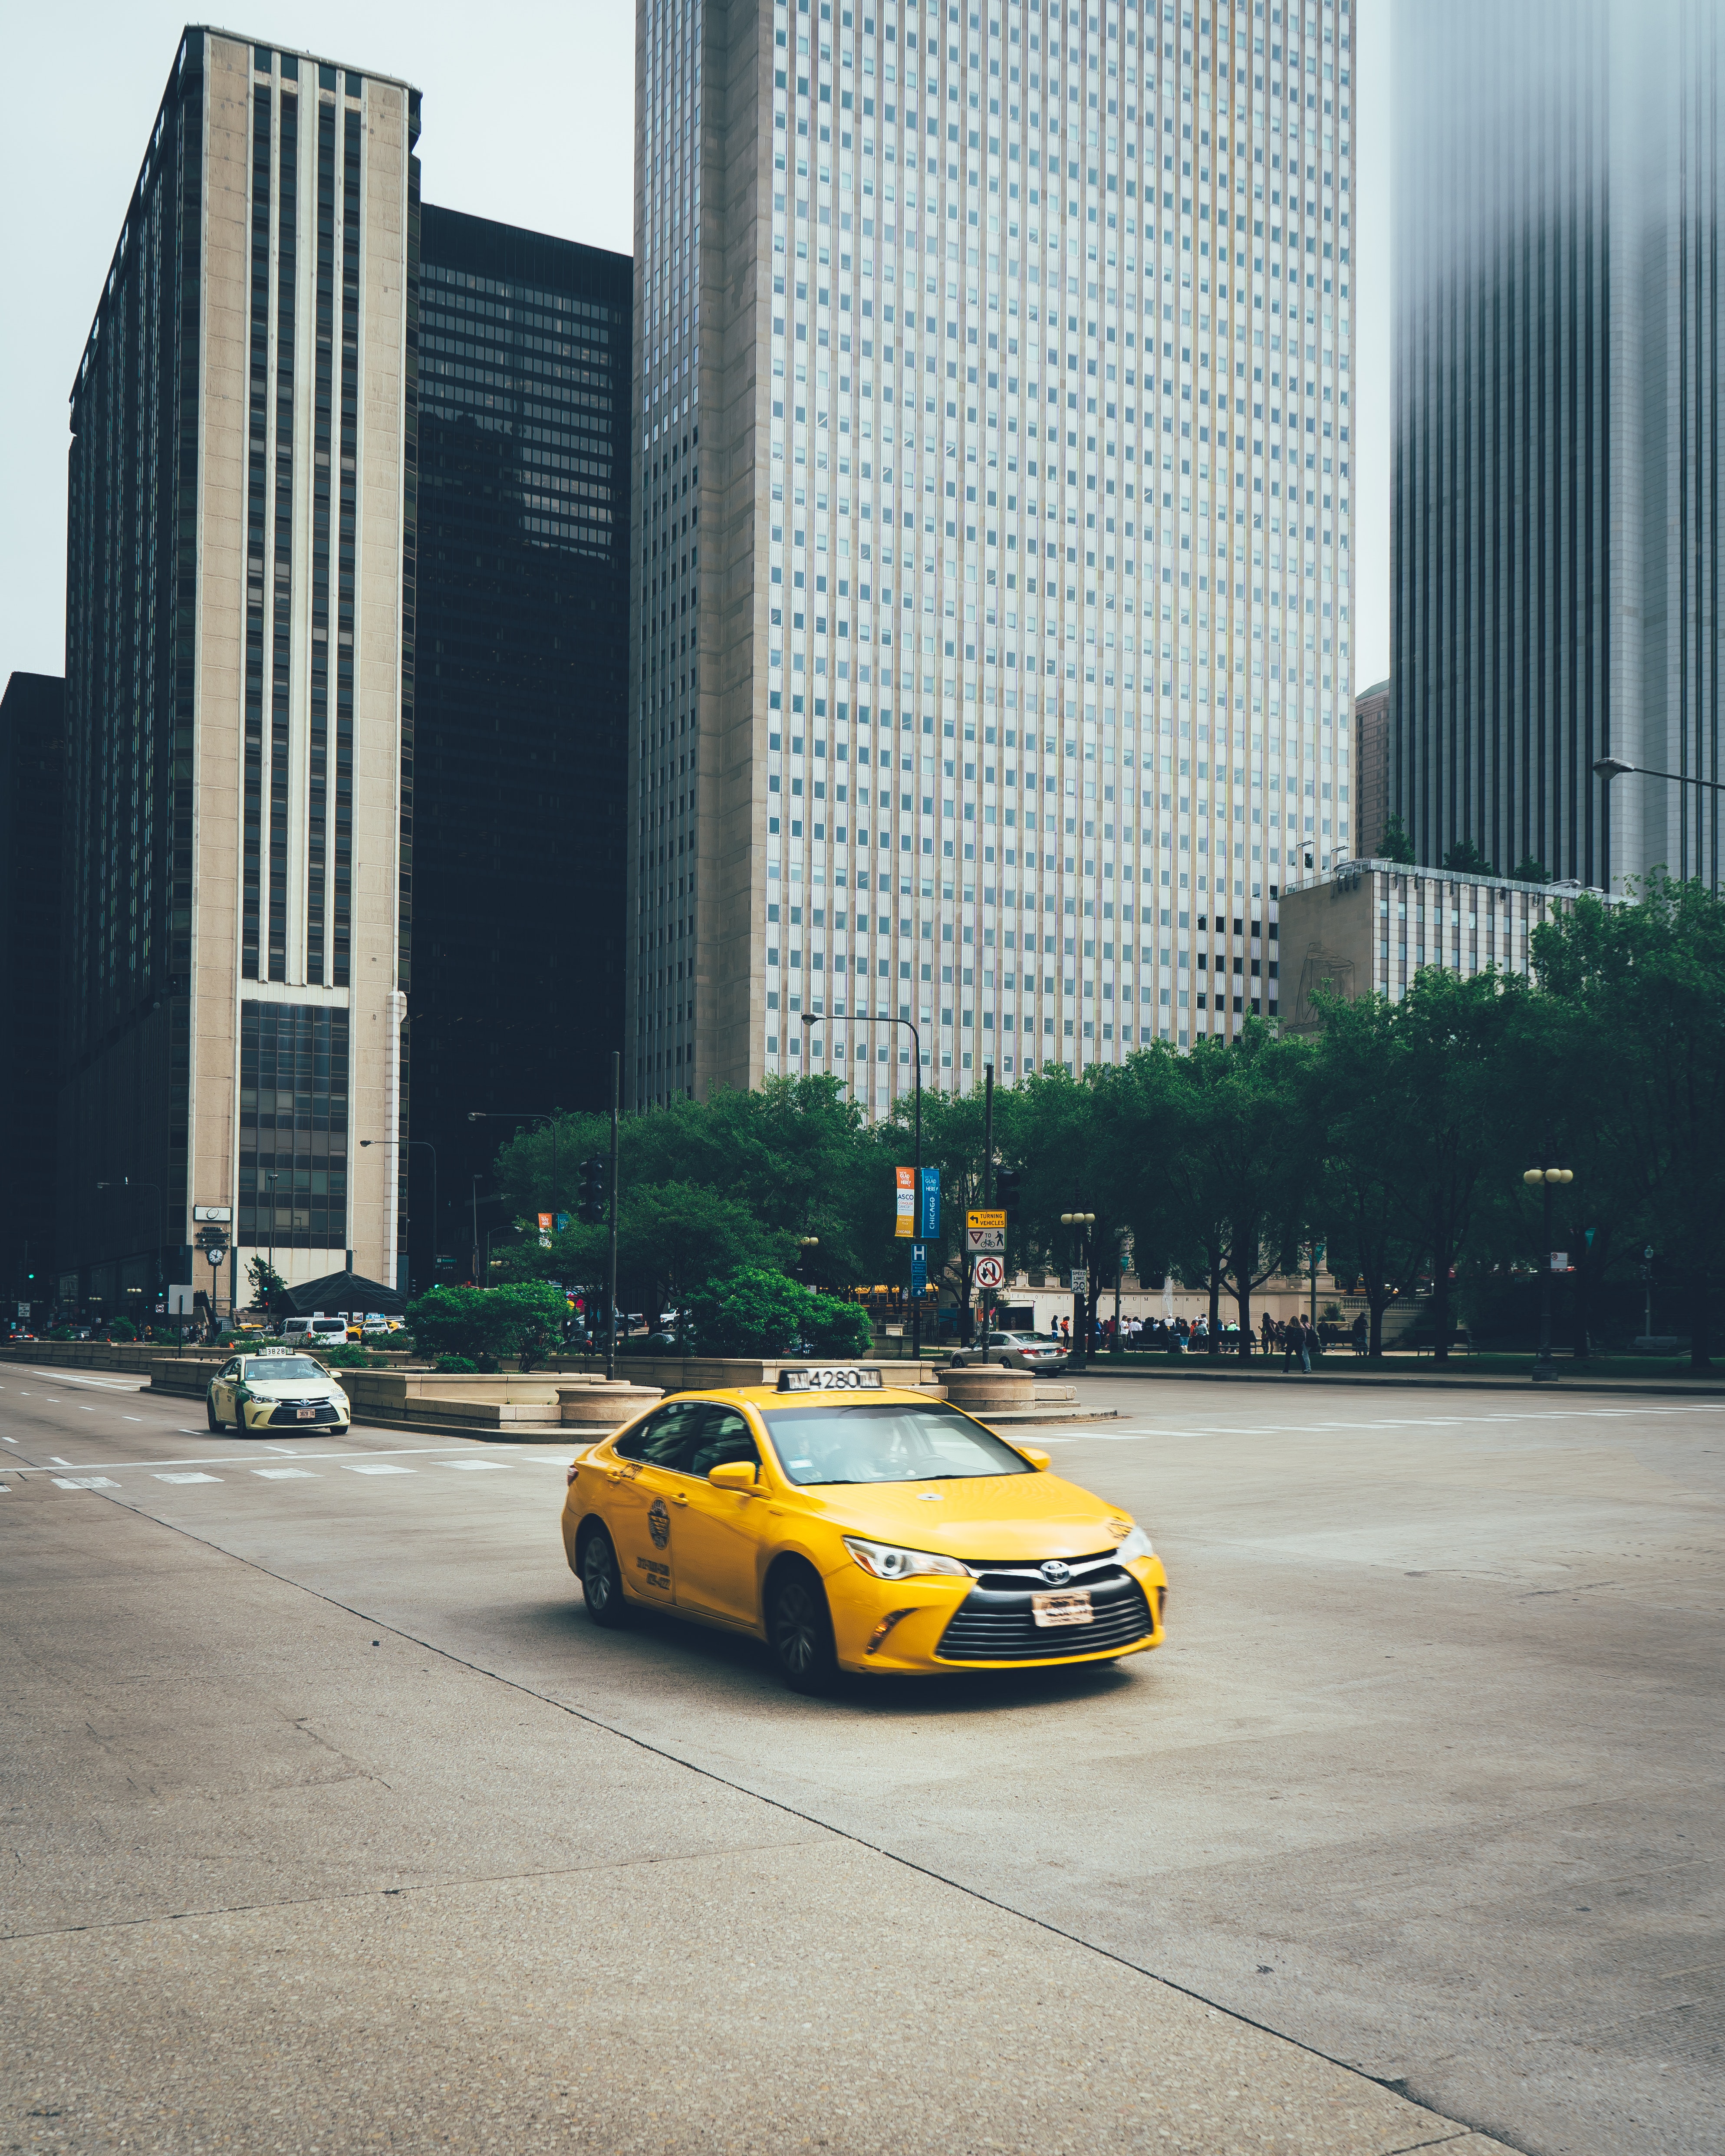 A yellow cab on the road